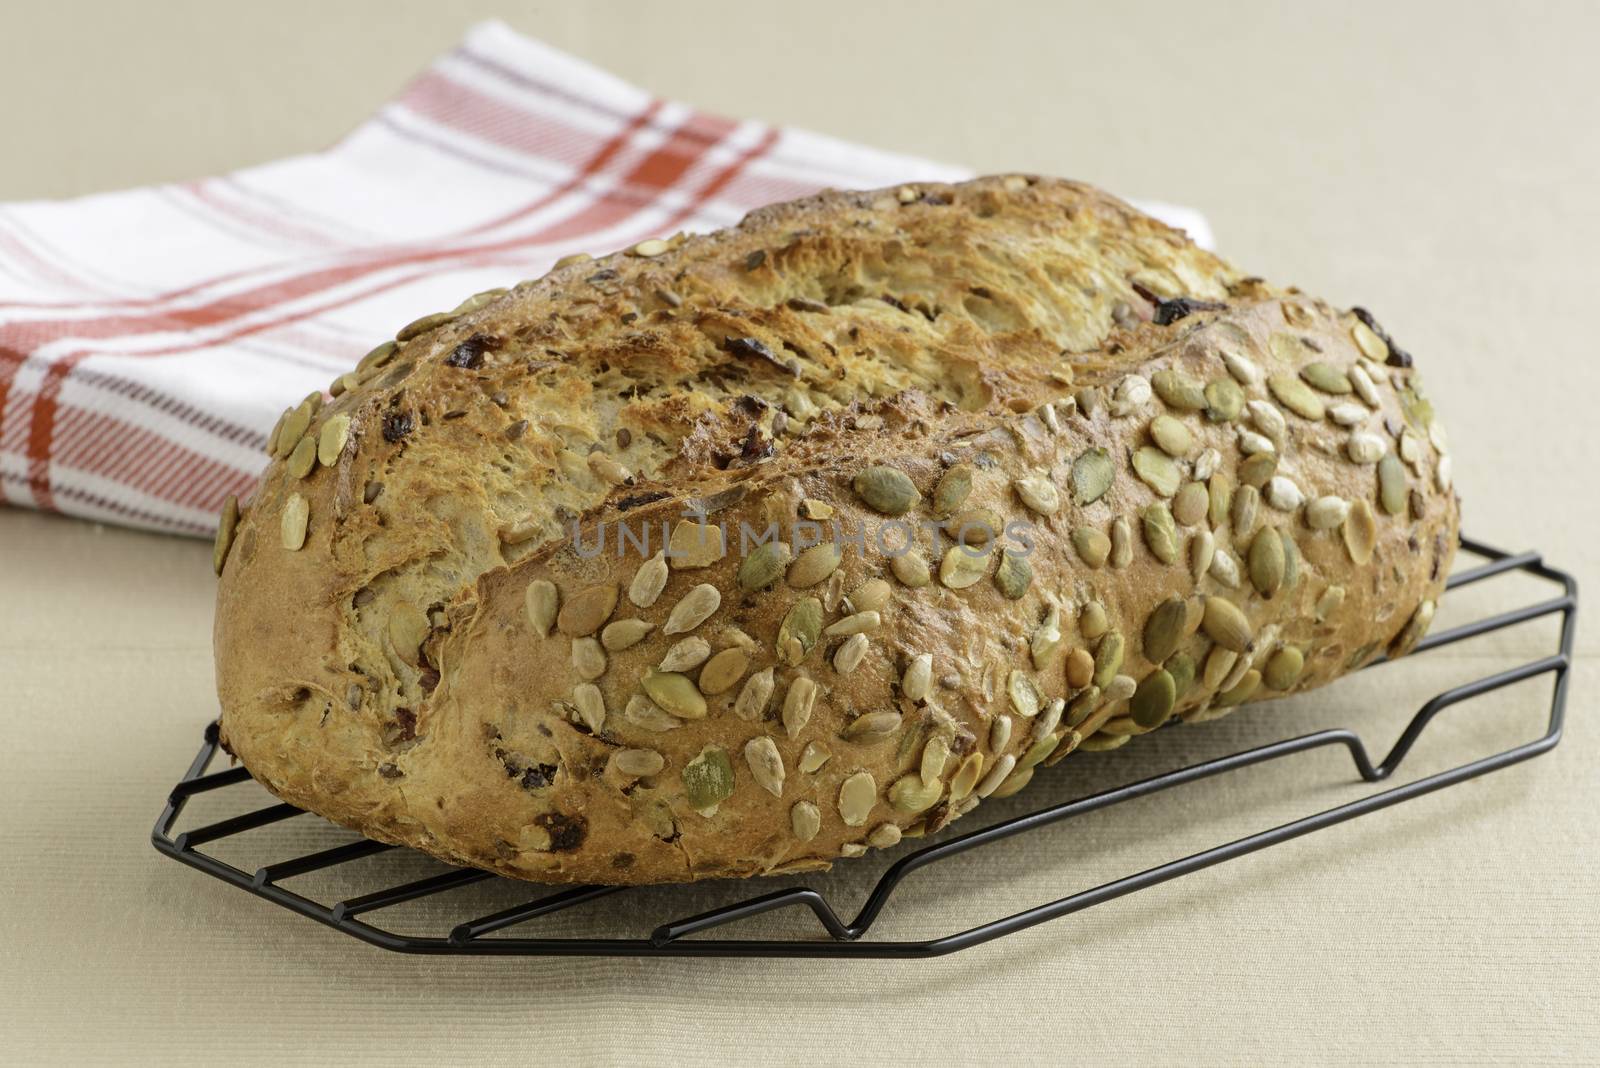 Cranberry Pumpkin Seed Bread by billberryphotography